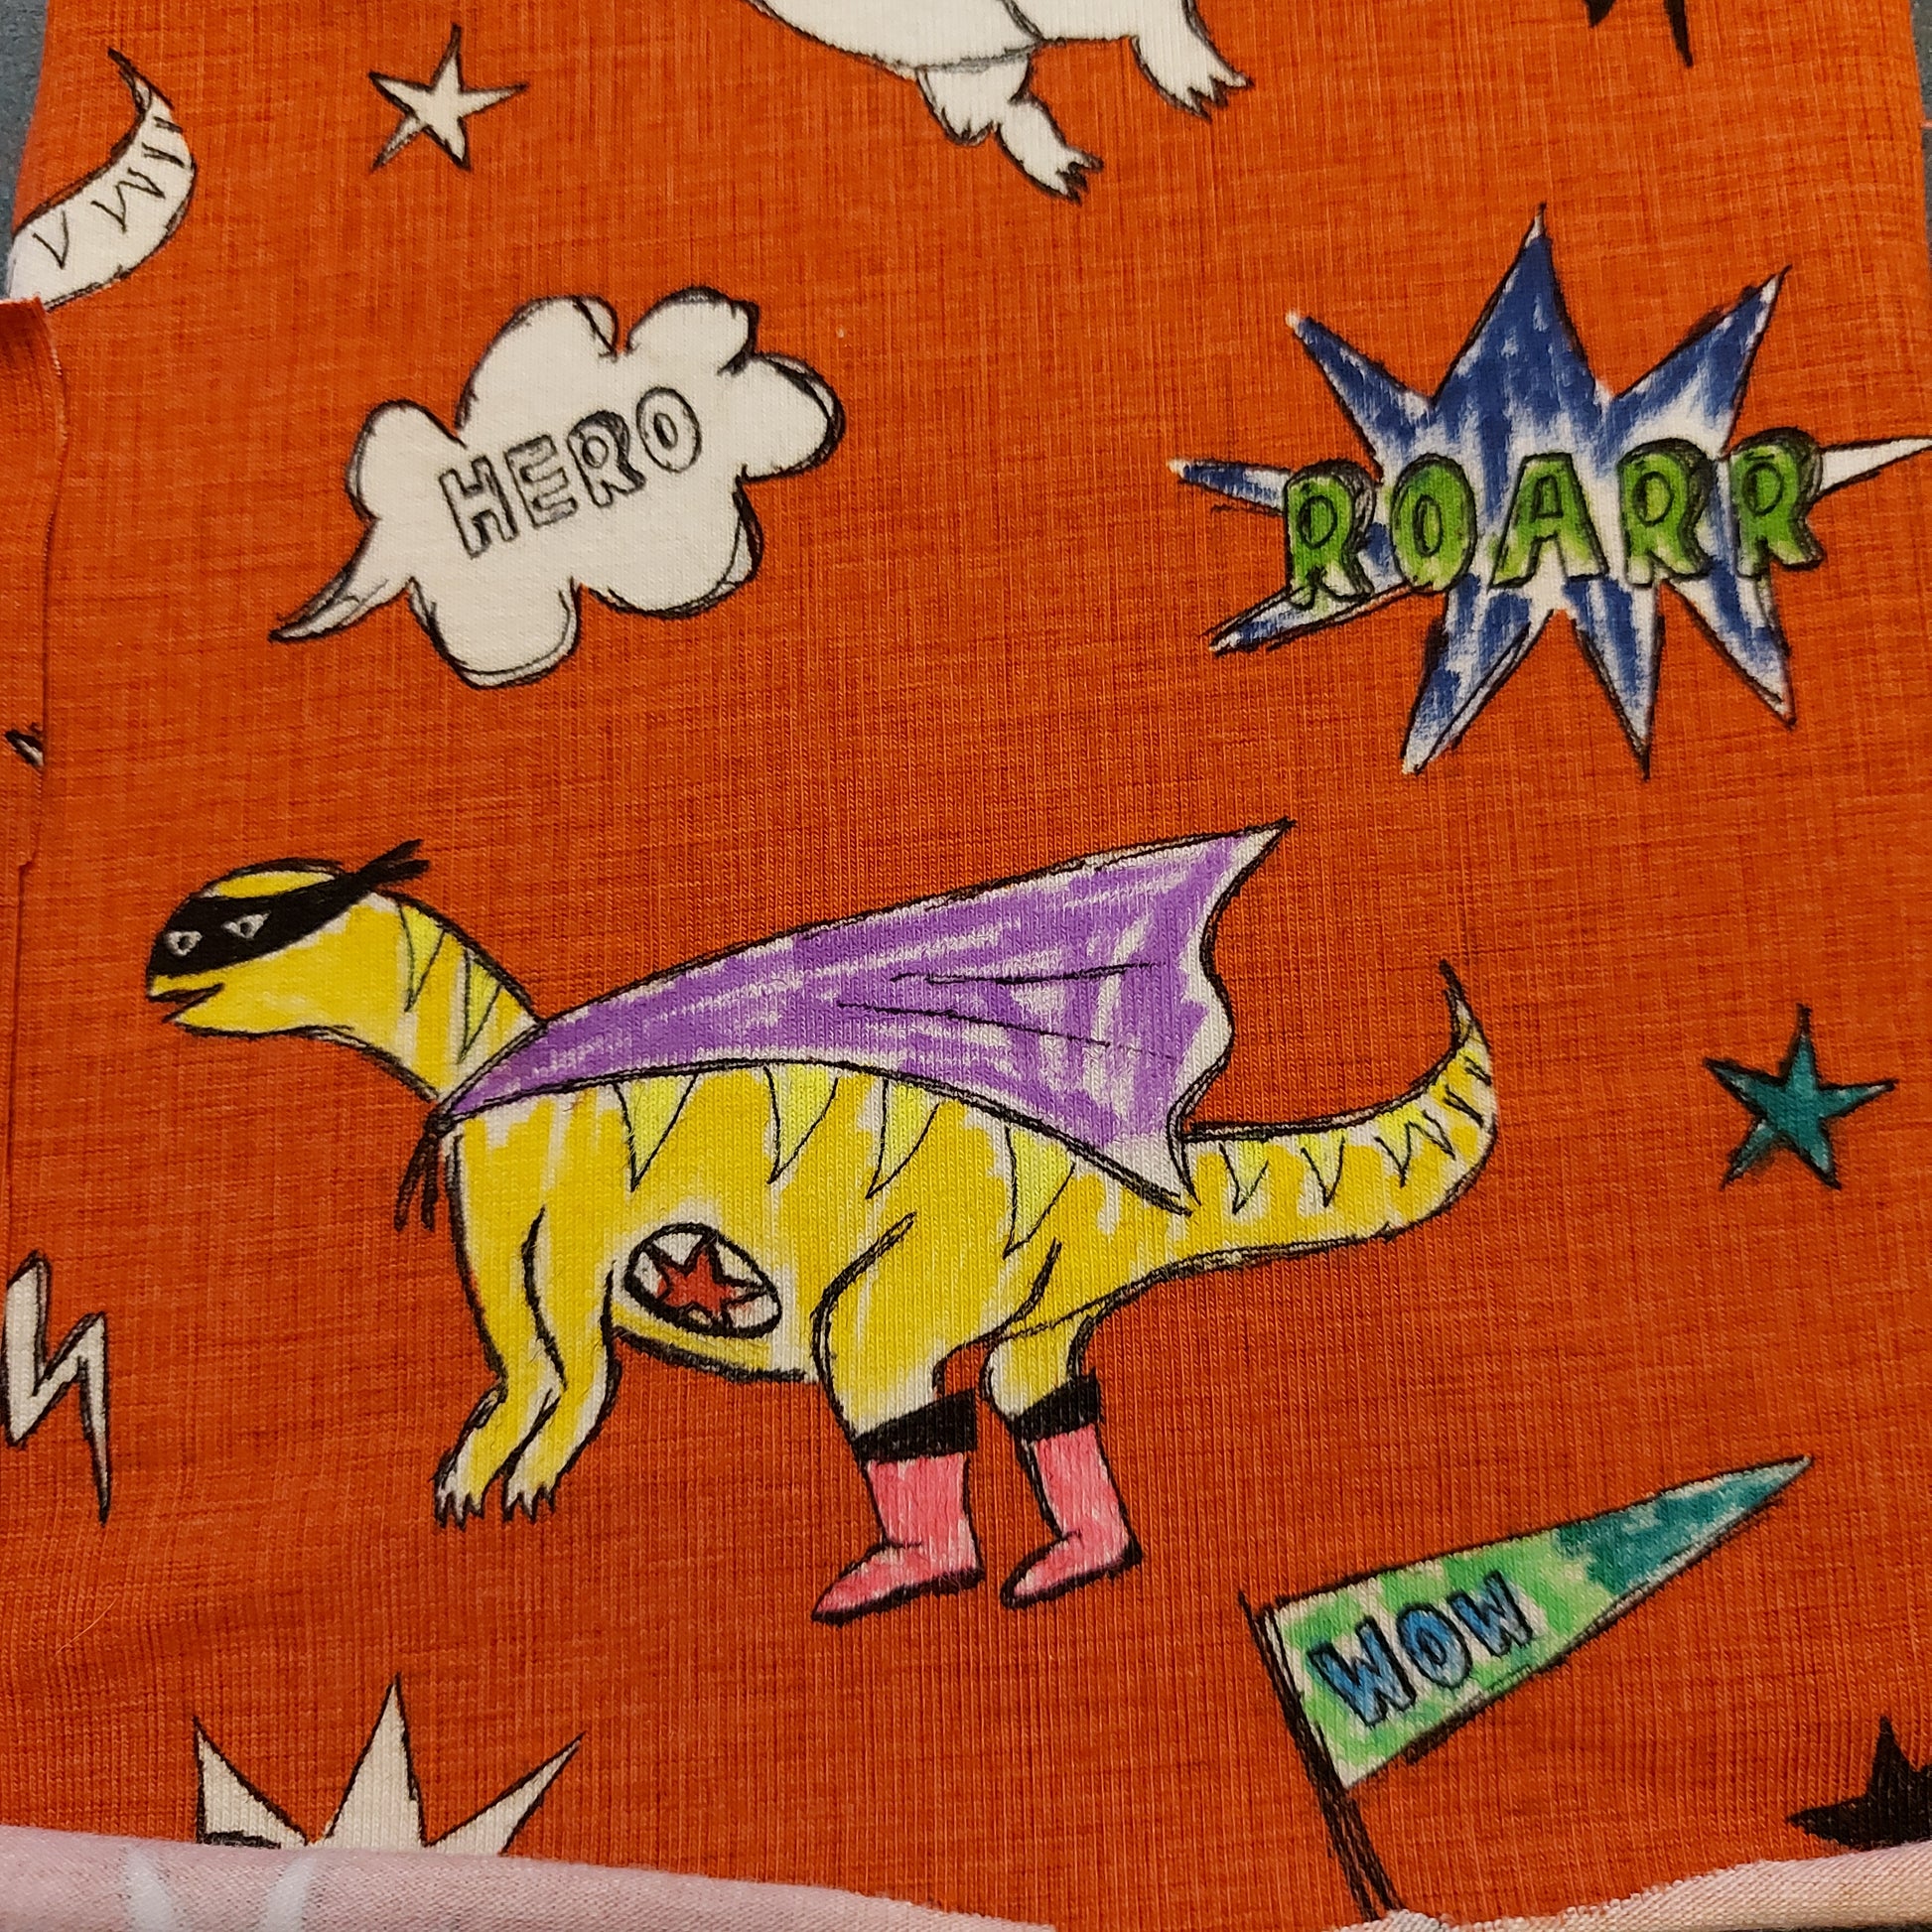 Dinosaur hero, colouring in, exclusive hand drawn mint green design on cotton lycra stretch jersey, apparel fabric, sold by the half metre